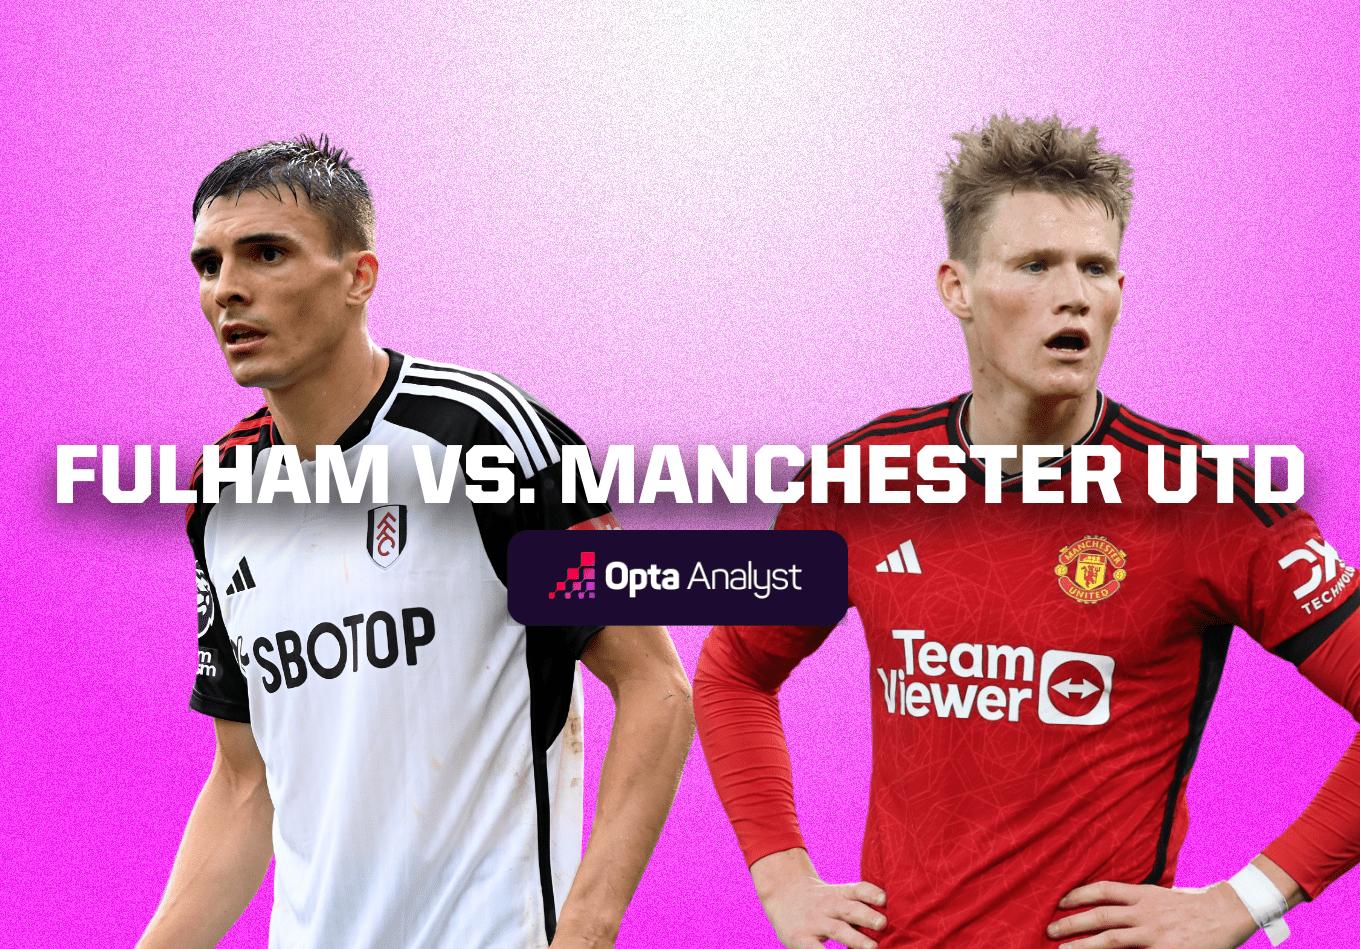 Fulham vs Manchester United: Prediction and Preview